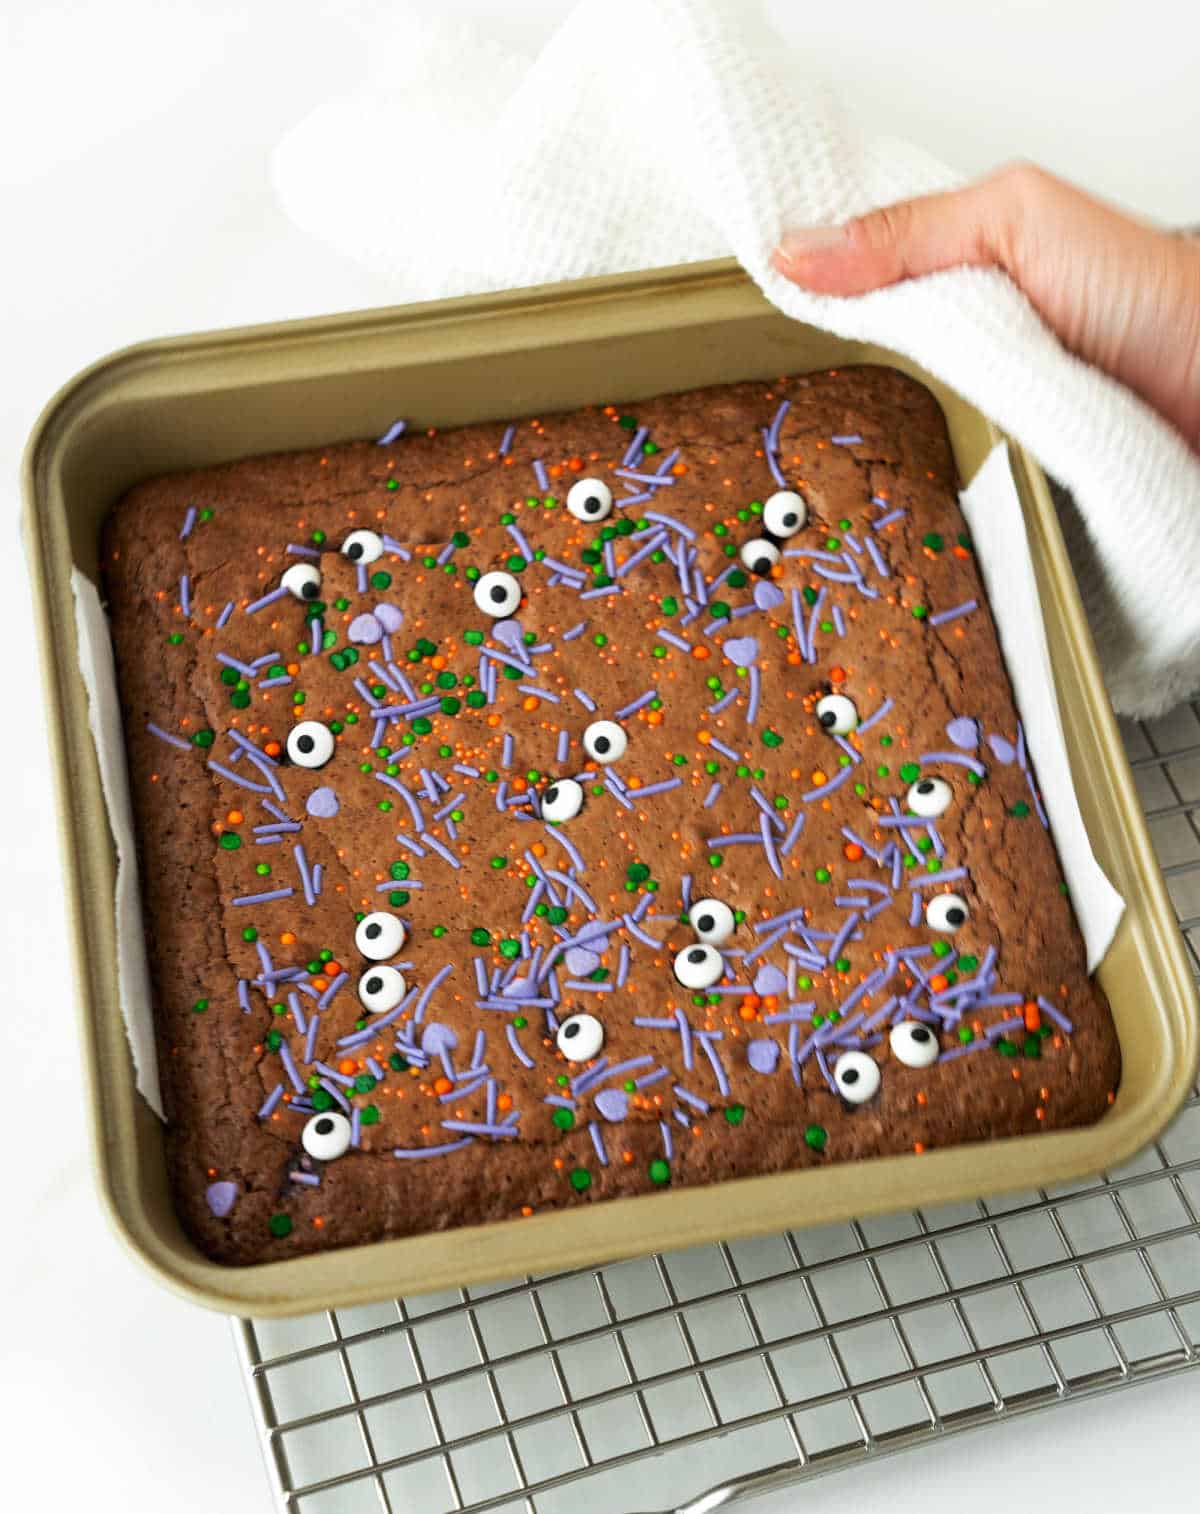 Metal square pan with baked halloween brownies. Wire rack, white background.